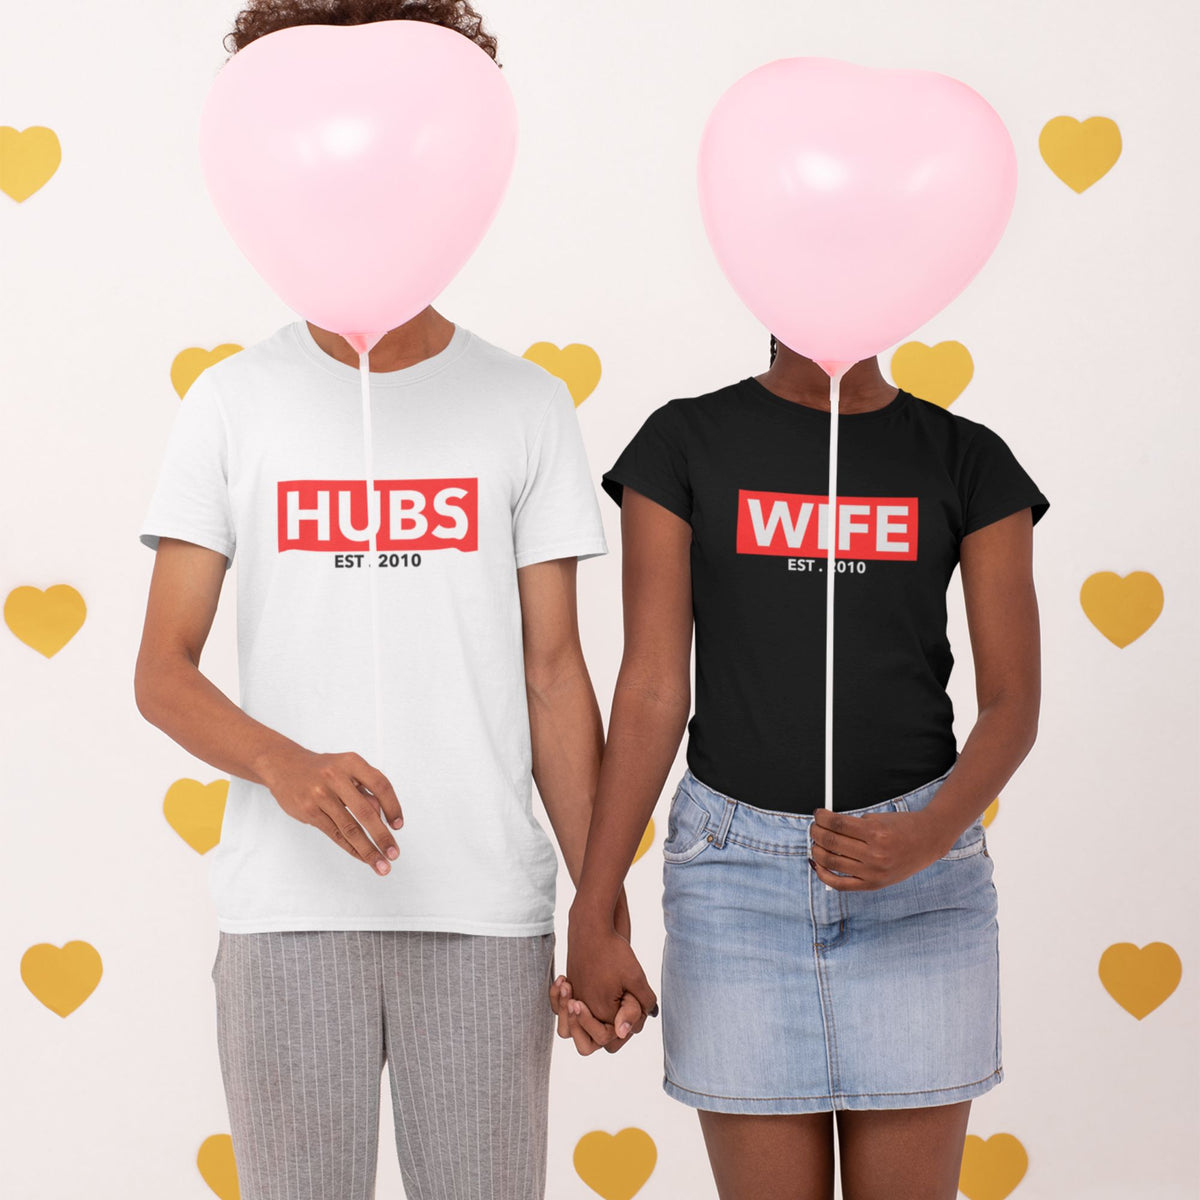 hubs-and-wife-est-white-and-black-couple-cotton-printed-t-shirt